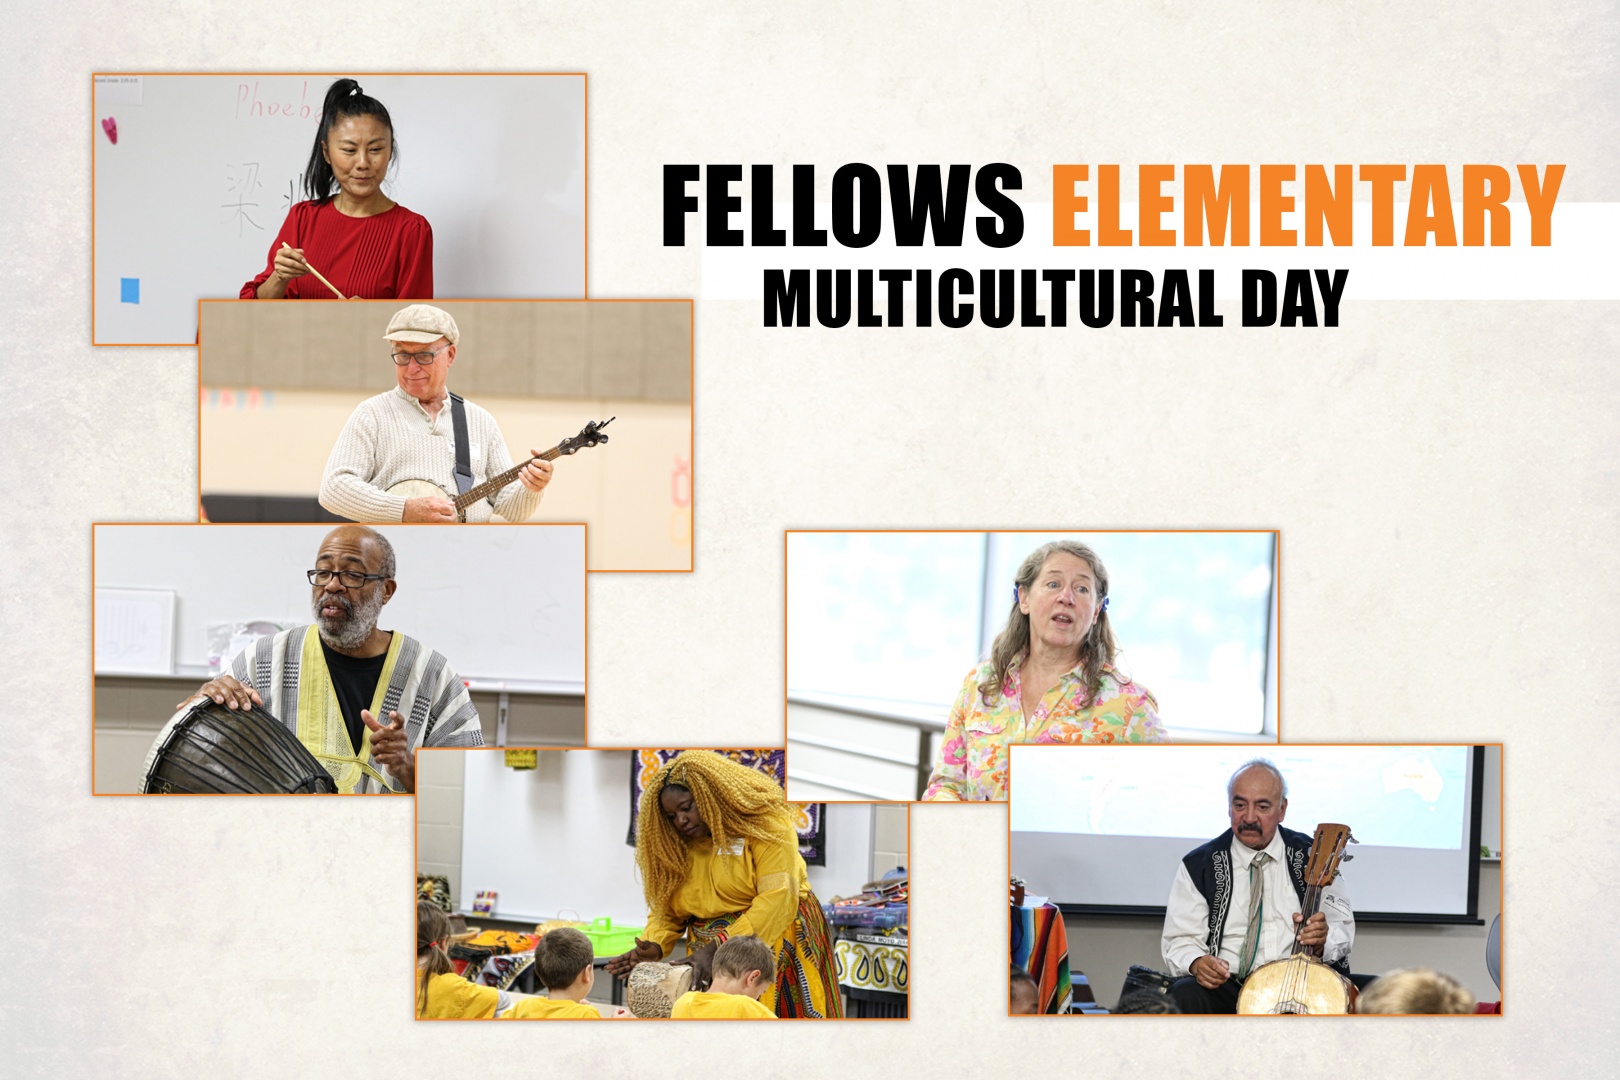 Fellows Elementary Multicultural Day